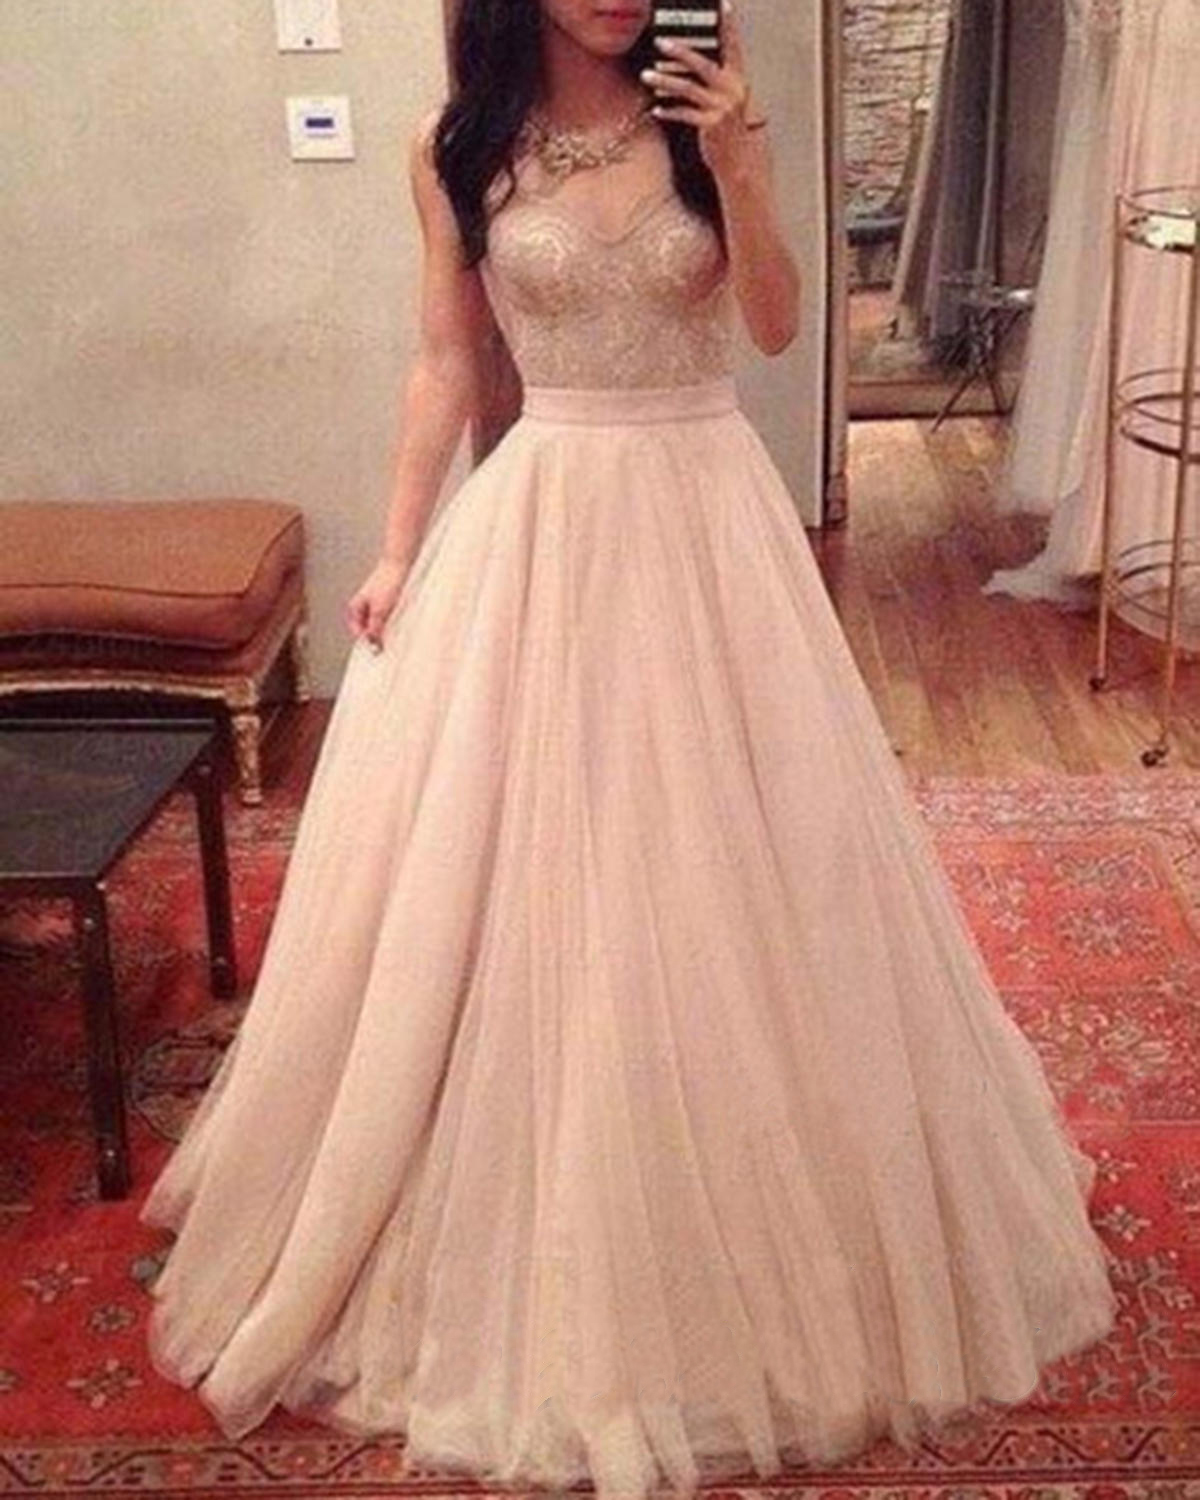 Long Prom Dress, White Prom Dress, Party Prom Dress, Ball Gown, A-line Prom Dress, Tulle Prom Dress, Sweetheart Prom Dress, 14920